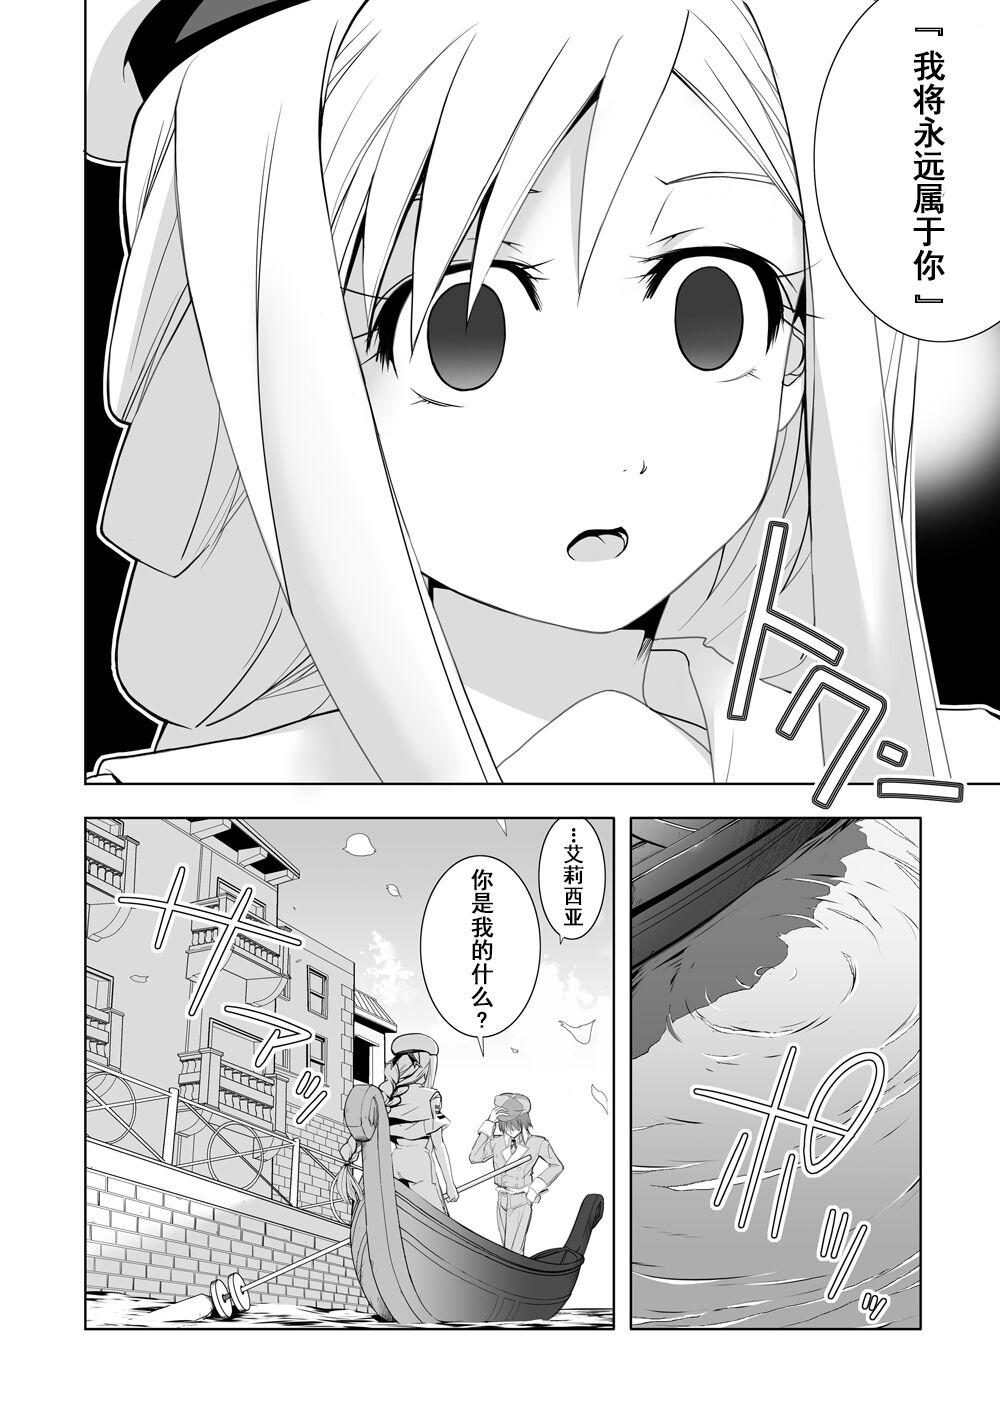 Pussyeating AR*A Mind-control Manga - Aria Mofos - Page 2